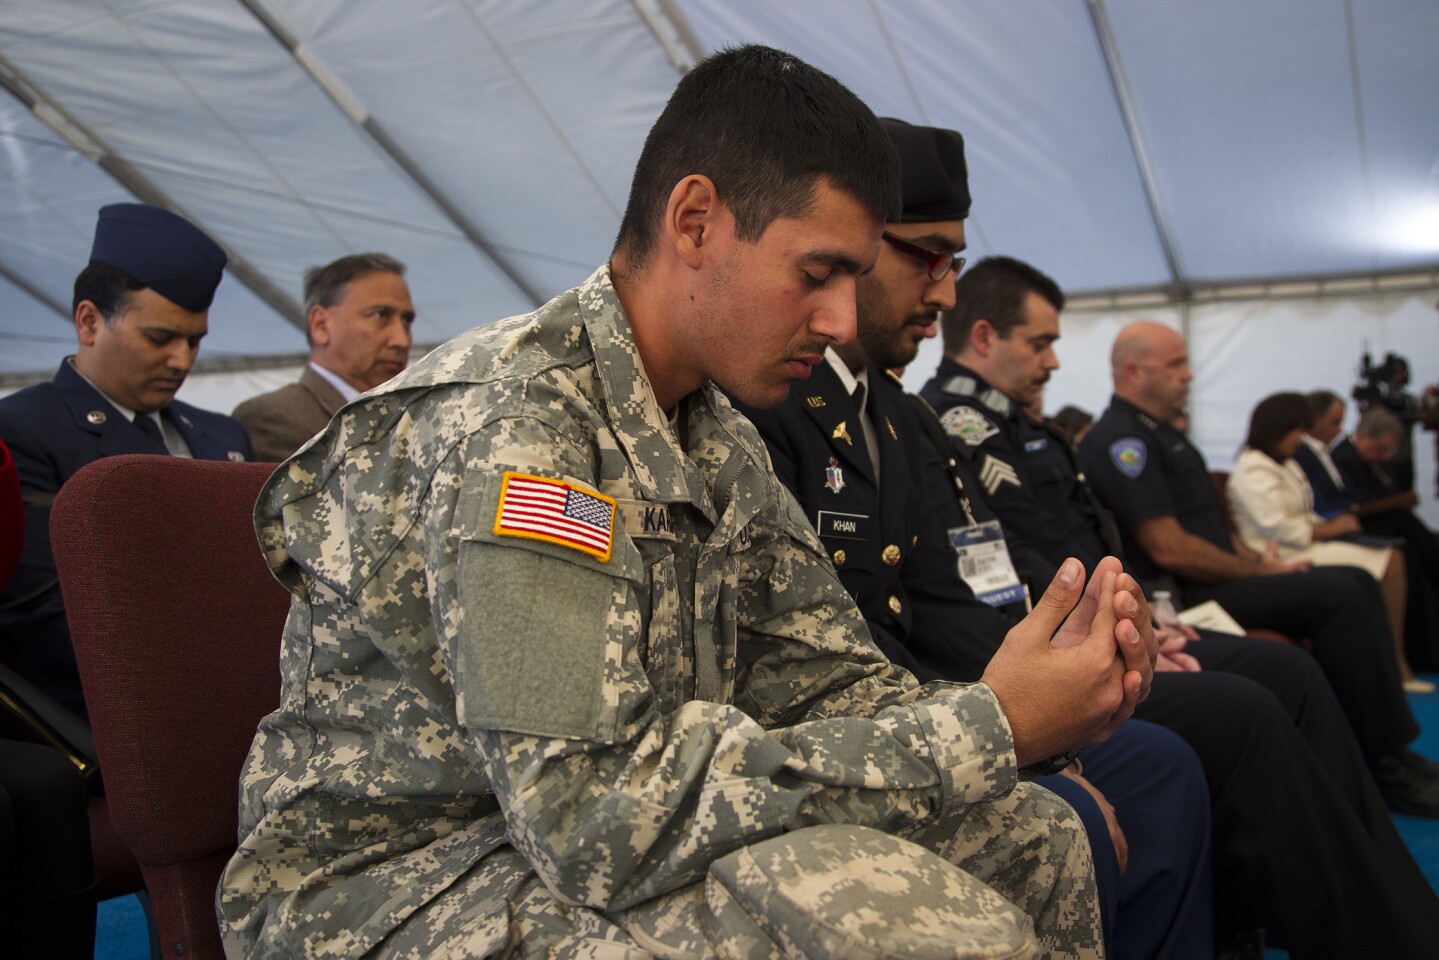 Army Pvt. Adeel Karim prays during a moment of silence for the San Bernardino shooting victims at the Jalsa Salana Convention at the Bait ul Hameed Mosque in Chino. Muslims from across the U.S. will confront the fears that non-Muslims have of Islam and delineate between true Islam and extremism.